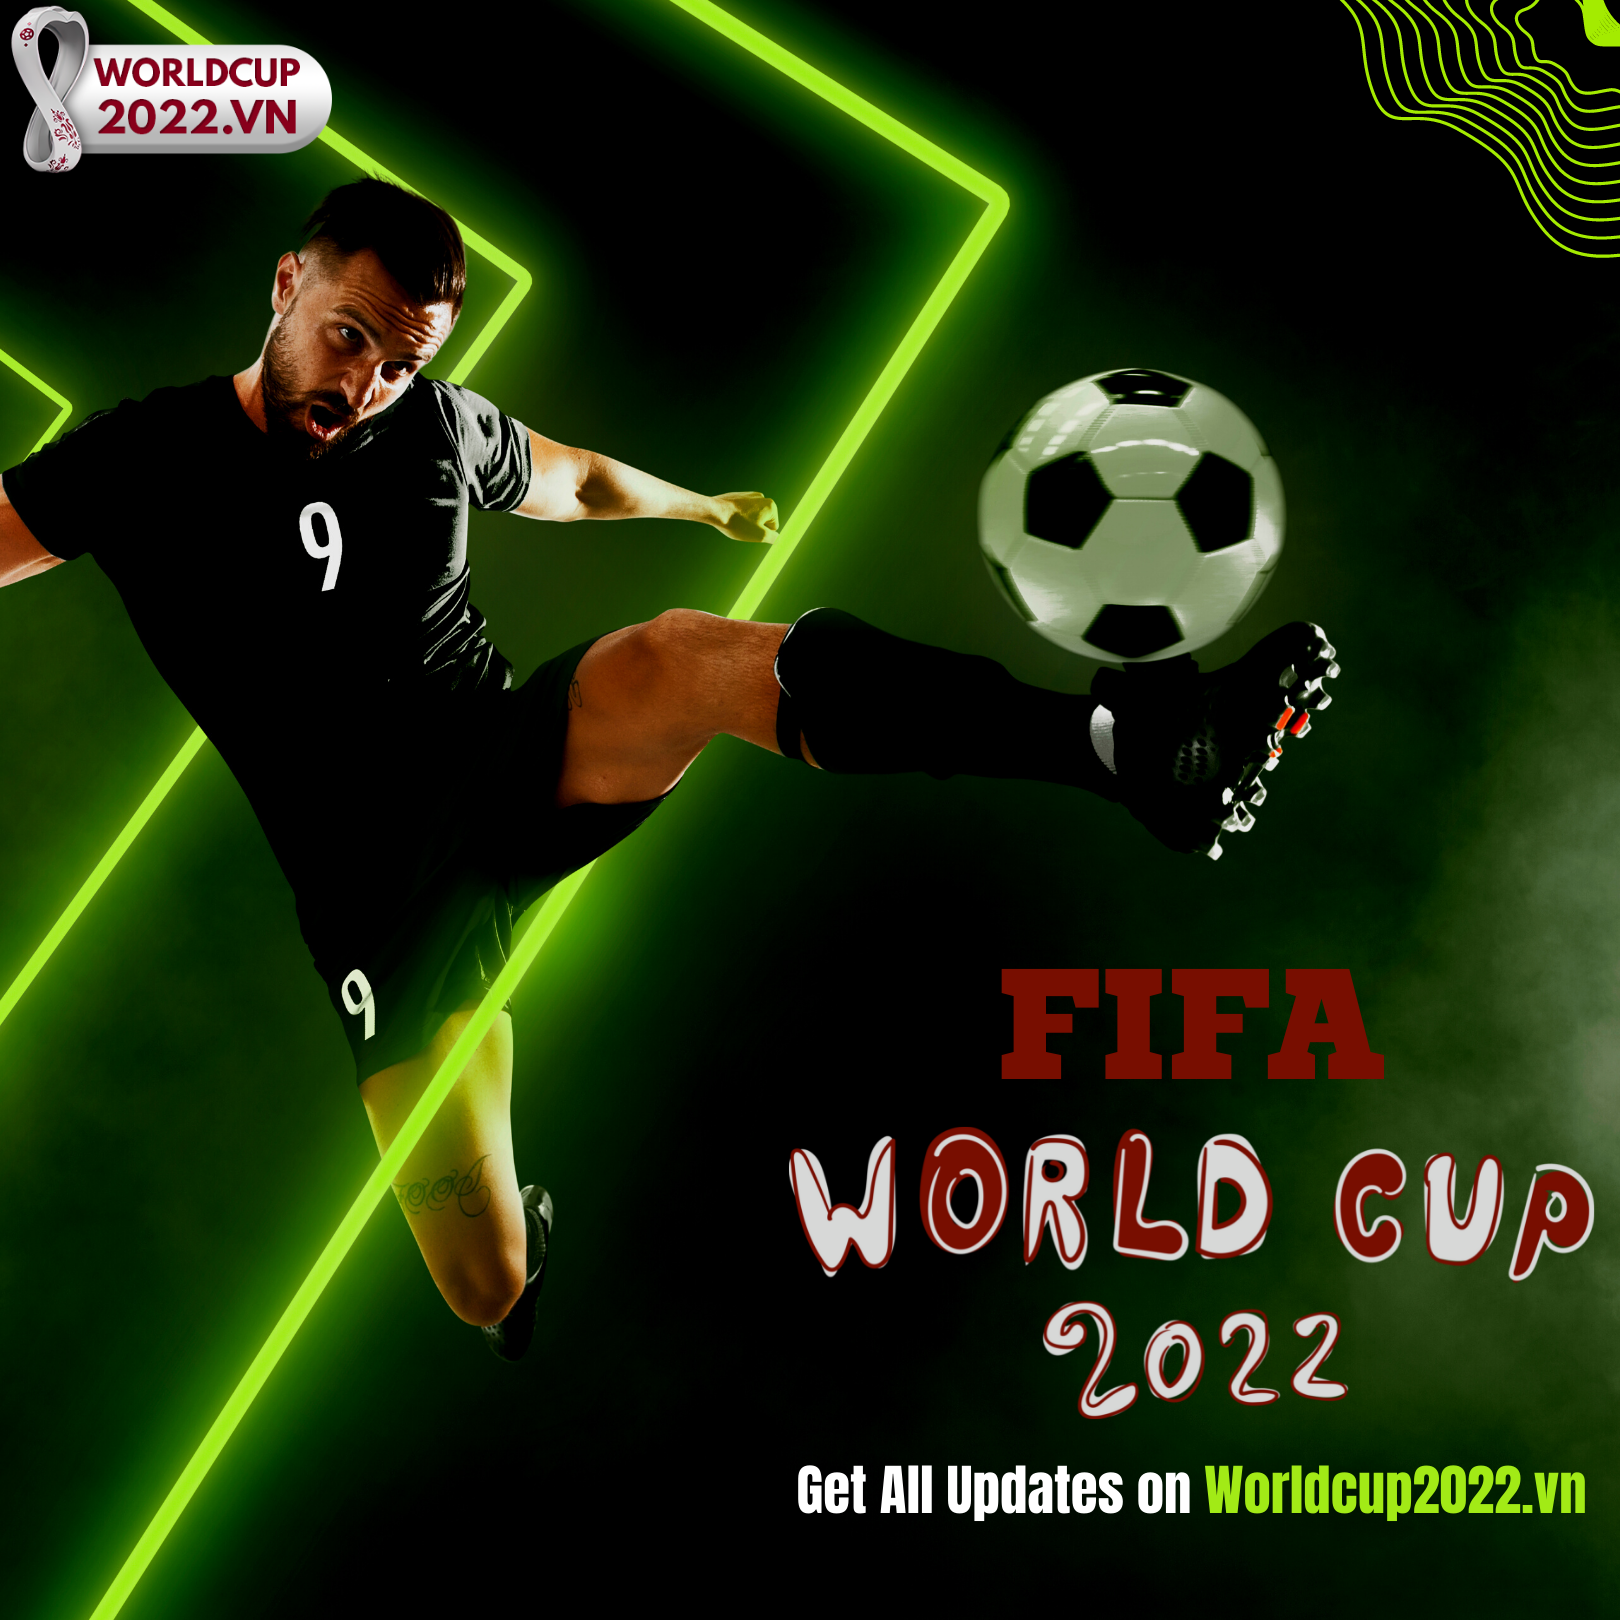 WORLDCUP2022.VN Features News and Updates on the Upcoming FIFA World Cup 2022